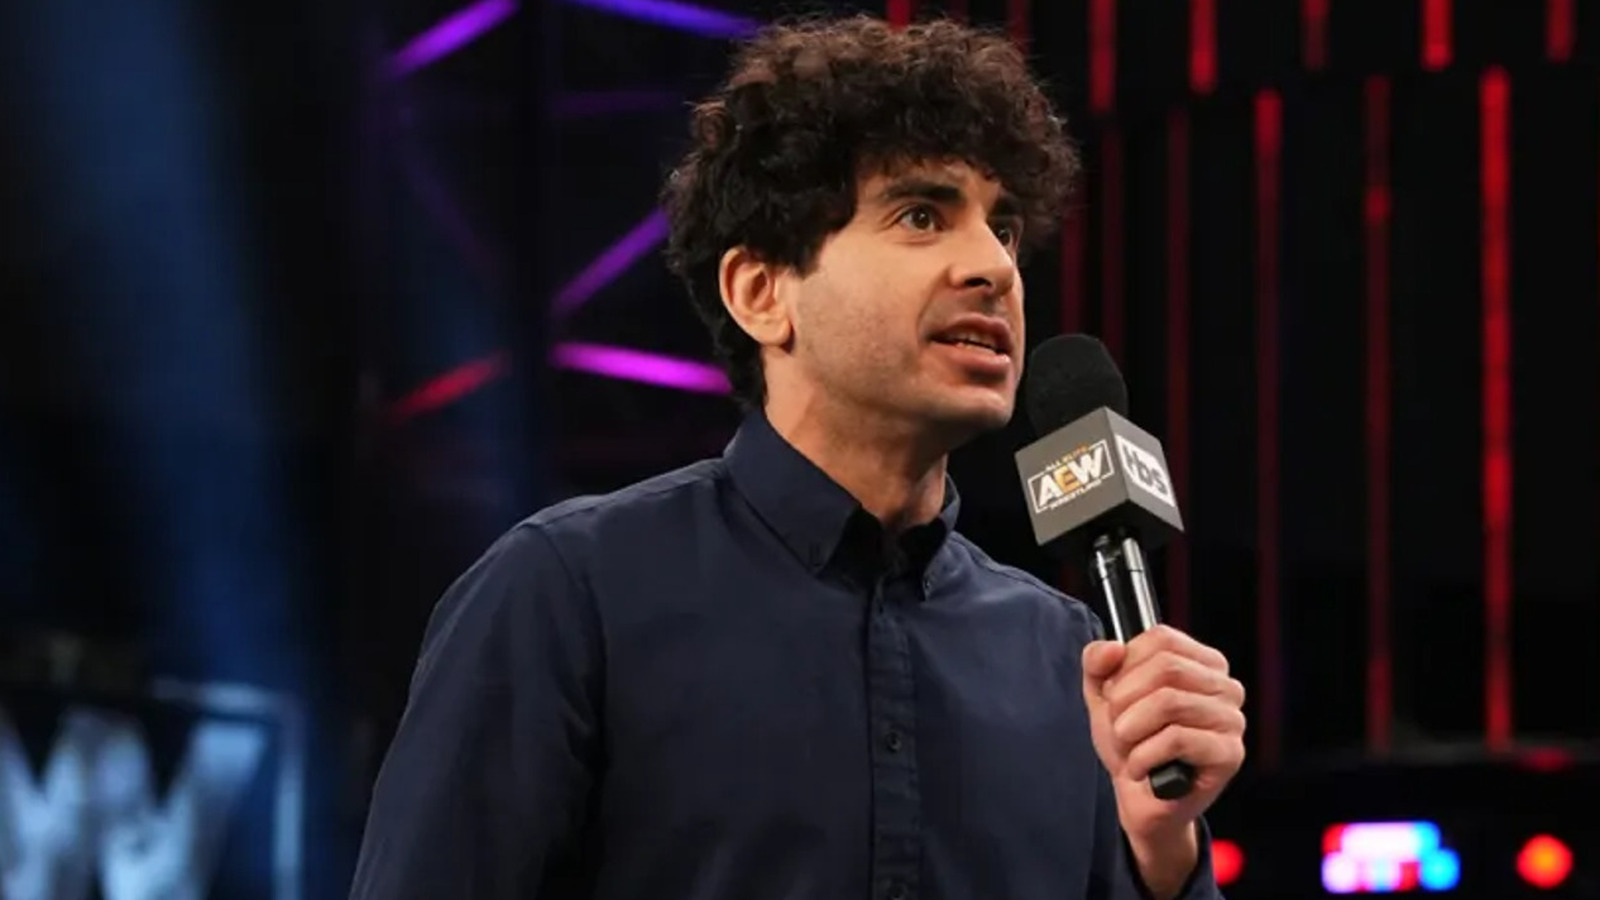 Tony Khan Announces New AEW PPV, WrestleDream, Will Take Place October 1 In Seattle